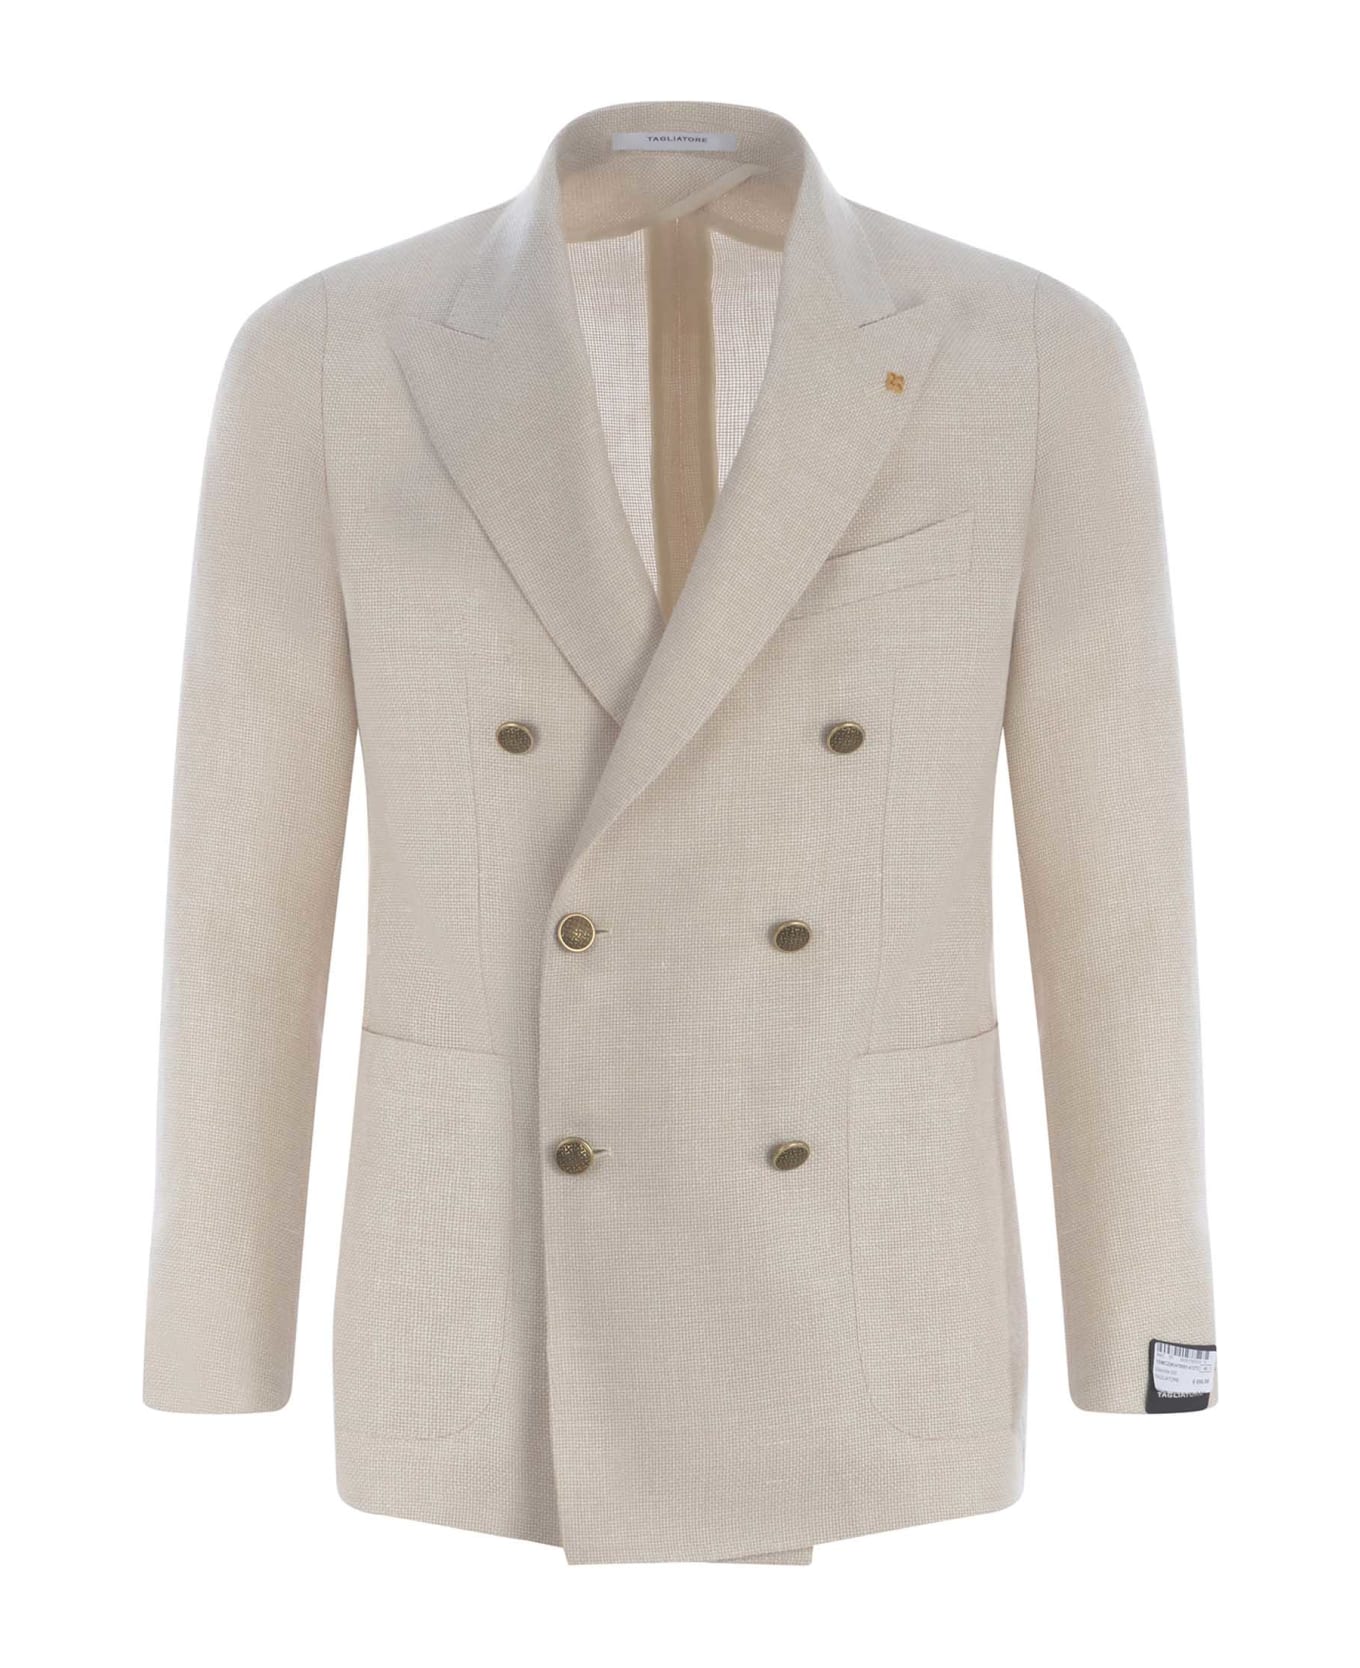 Tagliatore Double-breasted Jacket Tagliatore Made Of Virgin Wool And Linen Blend - Crema